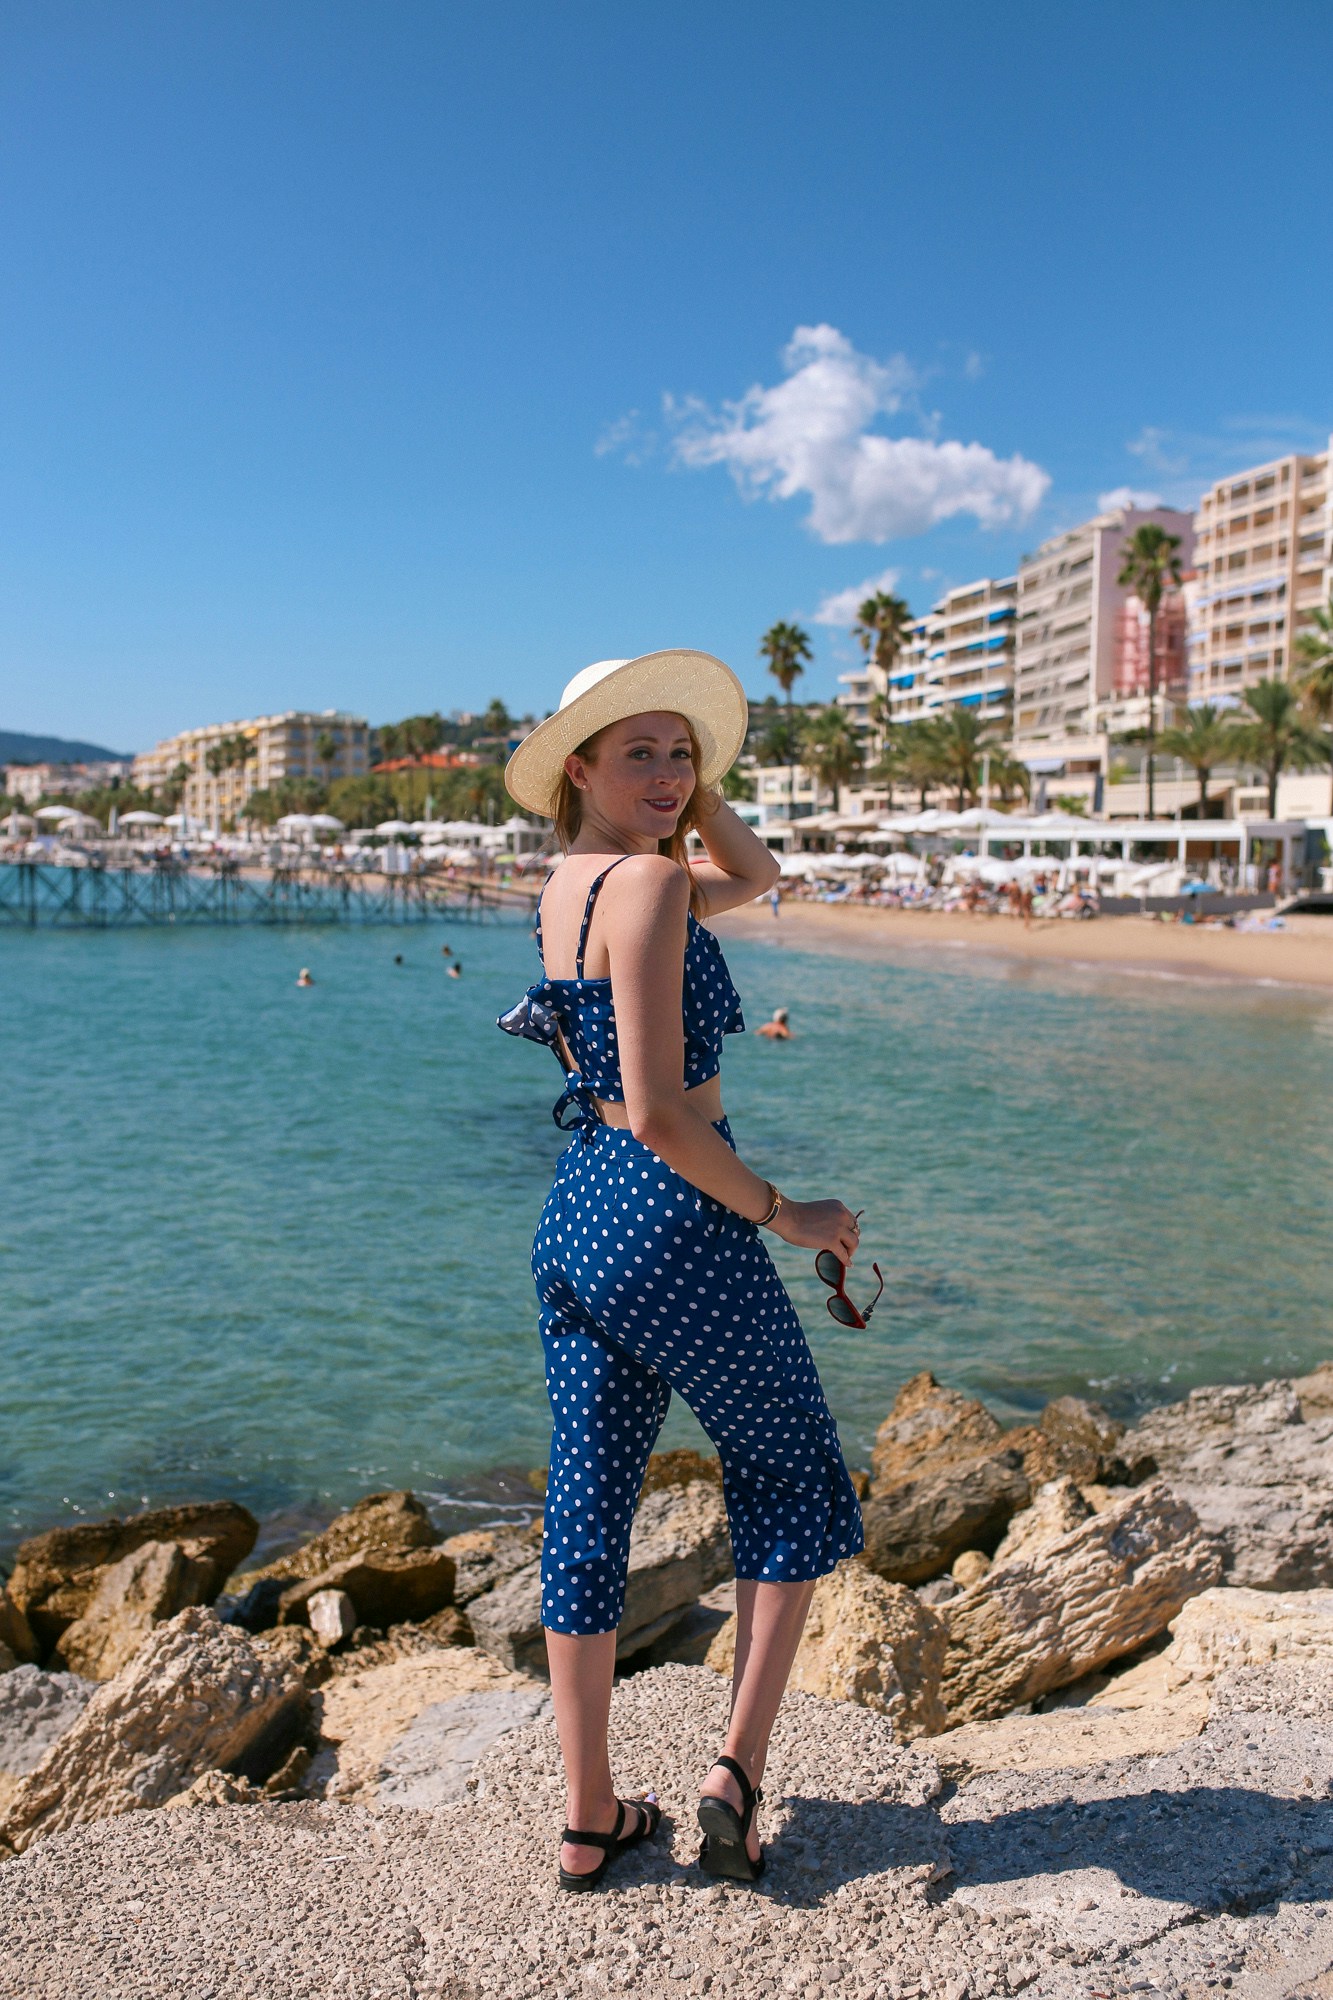 Plage du Midi, Cannes. Wearing a polka dot two piece set from SheIn.